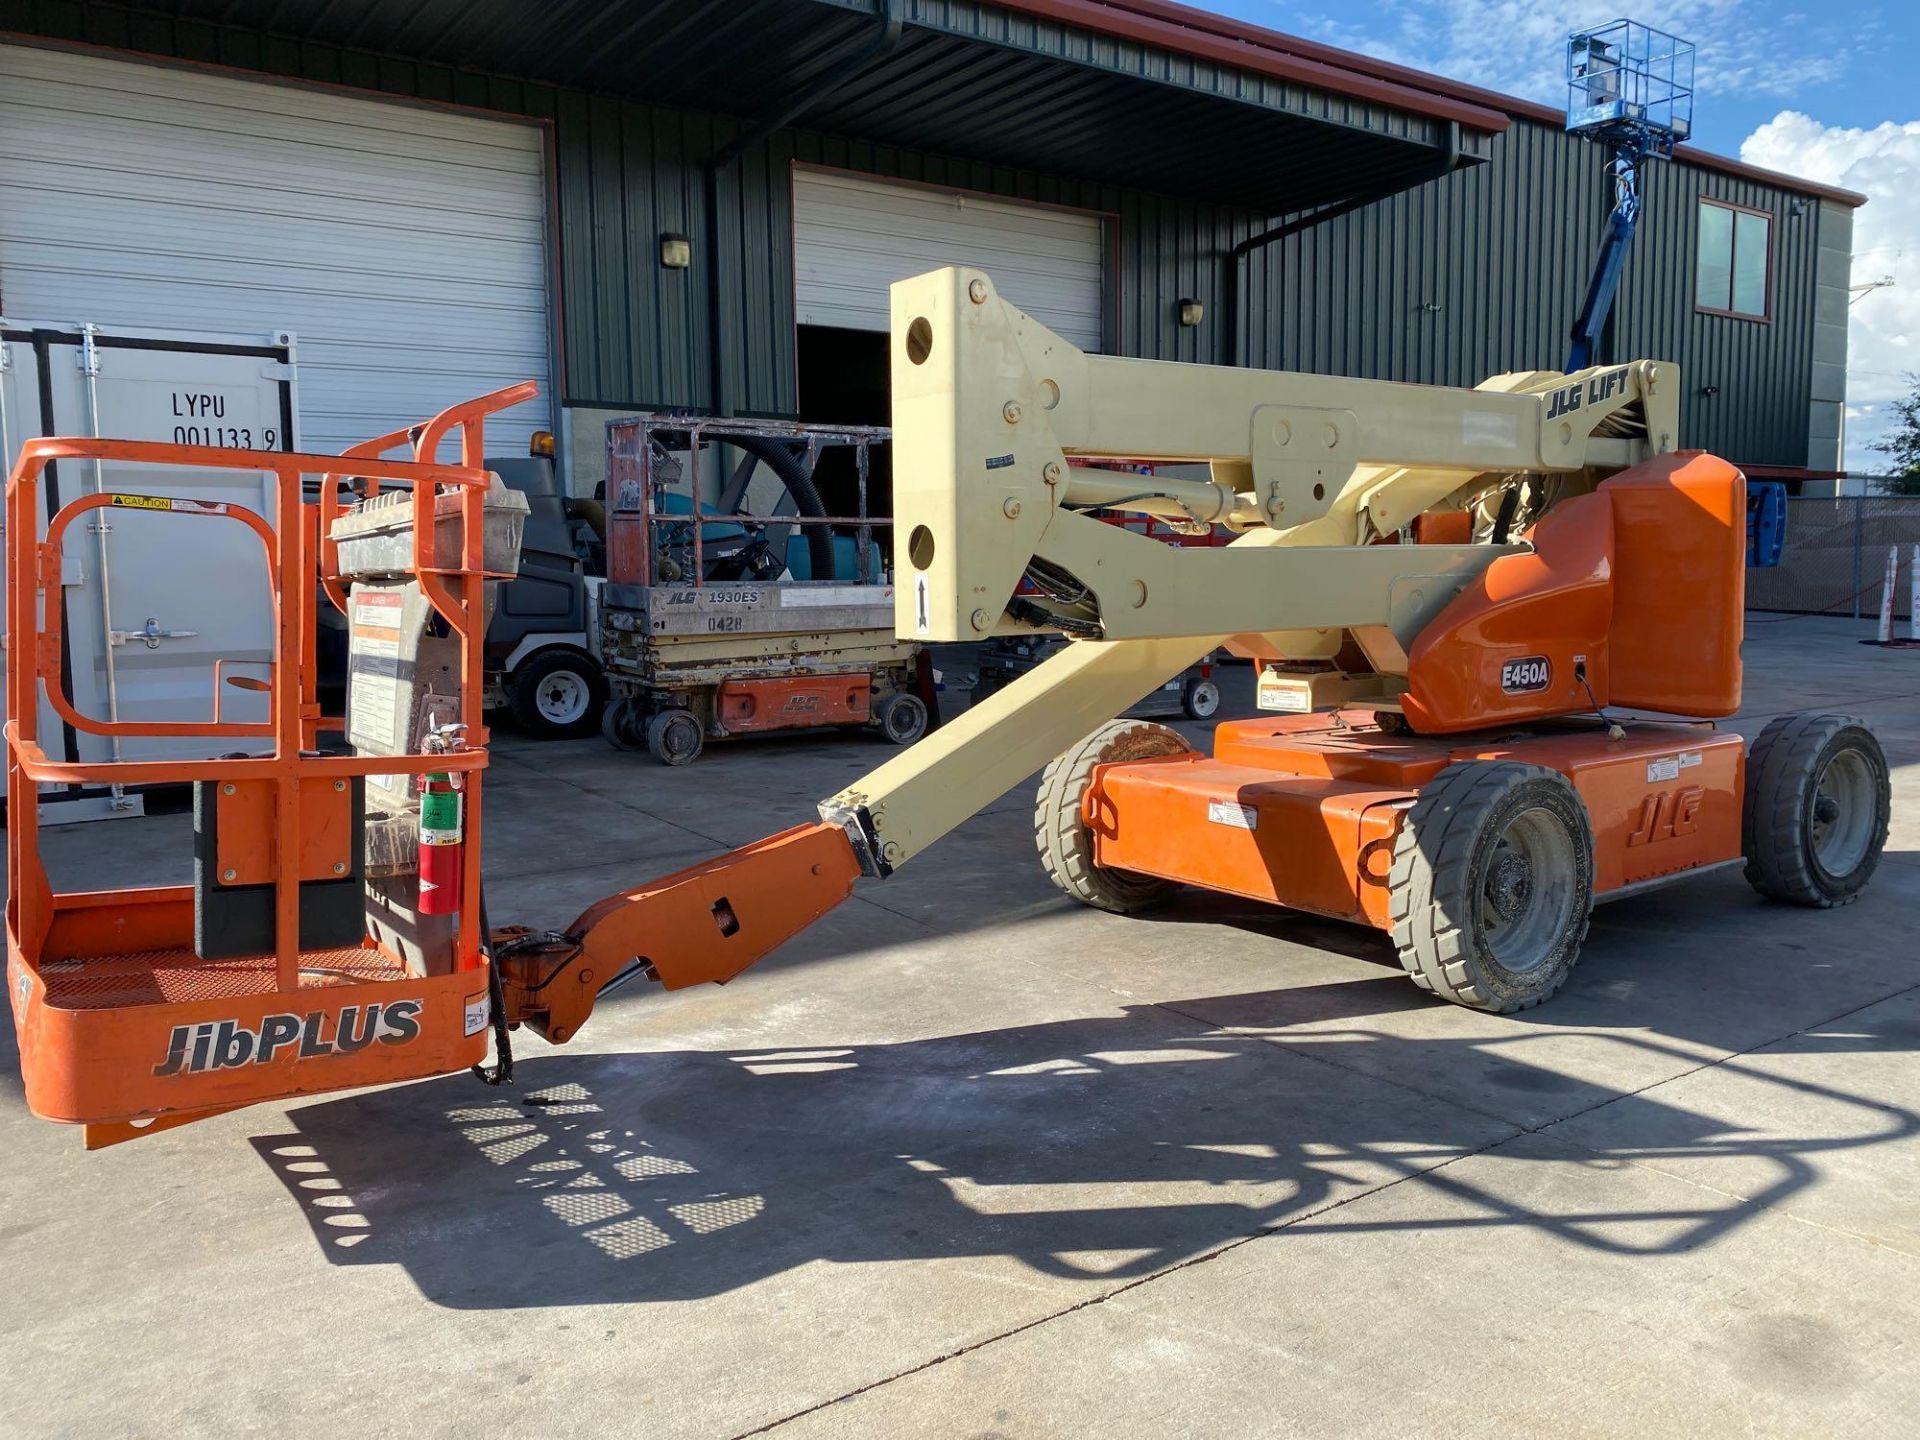 JLG E450A ARTICULATING BOOM LIFT, ELECTRIC 45’ PLATFORM HEIGHT, RUNS AND OPERATES - Image 2 of 10